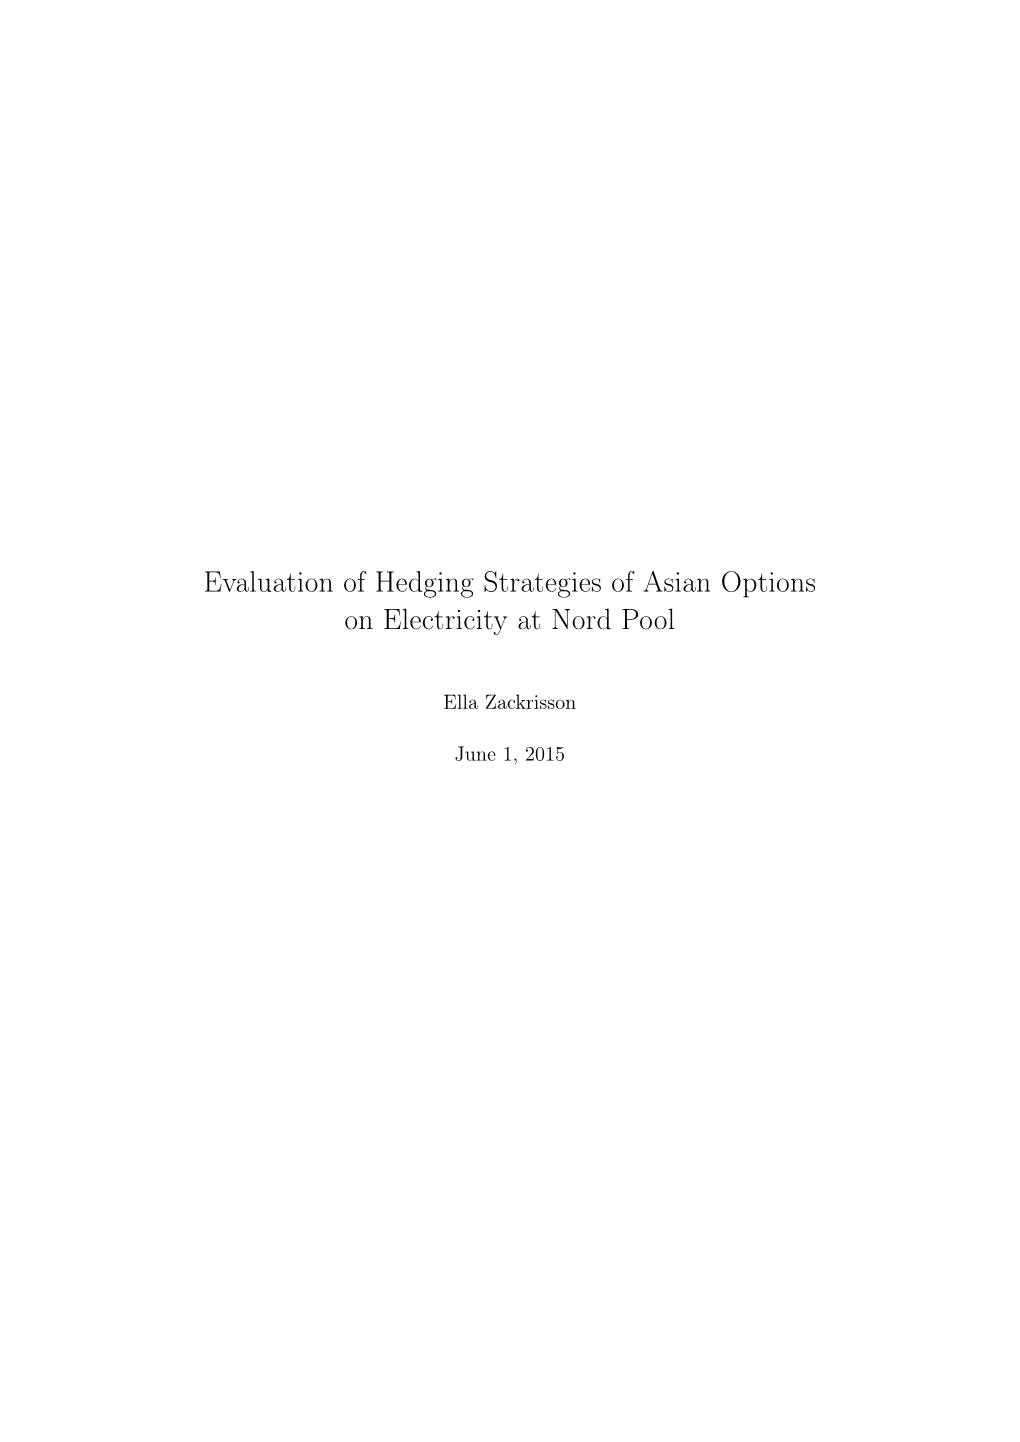 Evaluation of Hedging Strategies of Asian Options on Electricity at Nord Pool